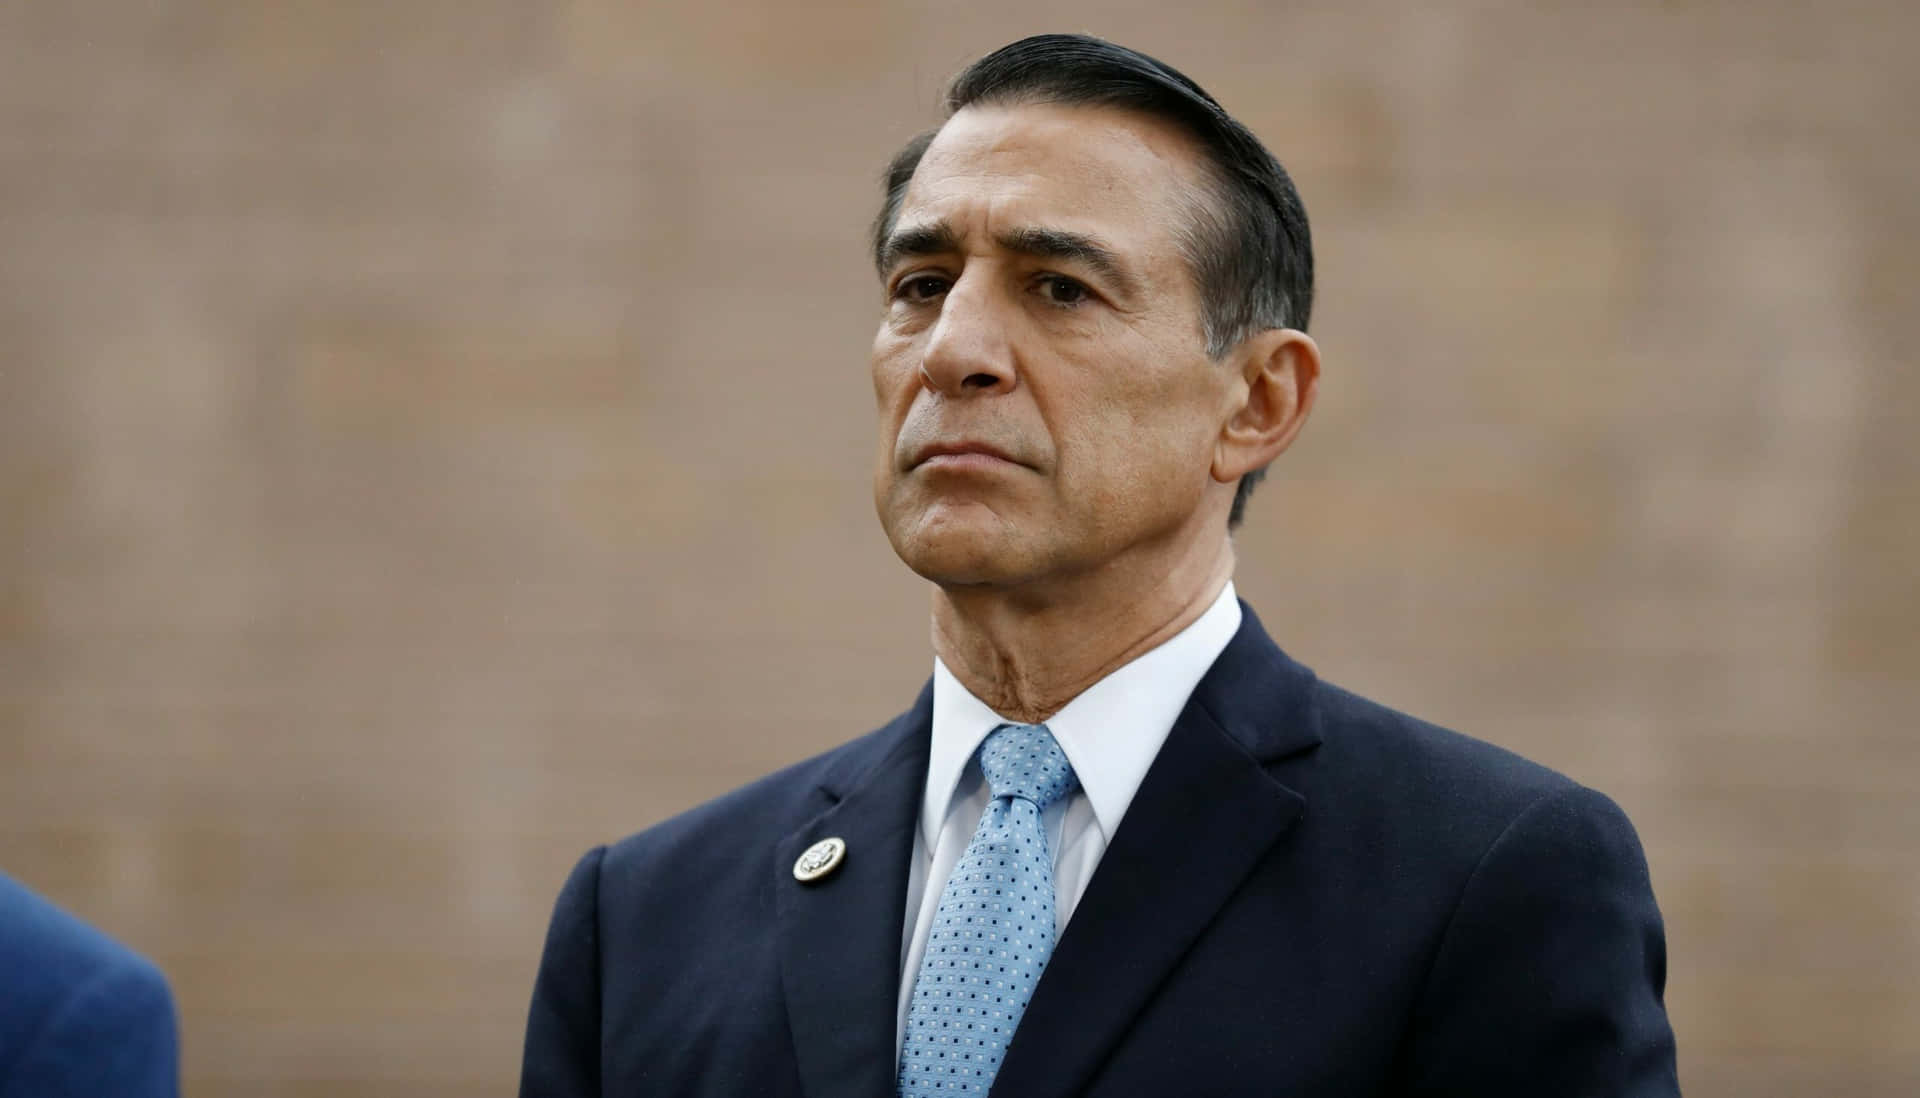 Darrell Issa With Serious Face Wallpaper